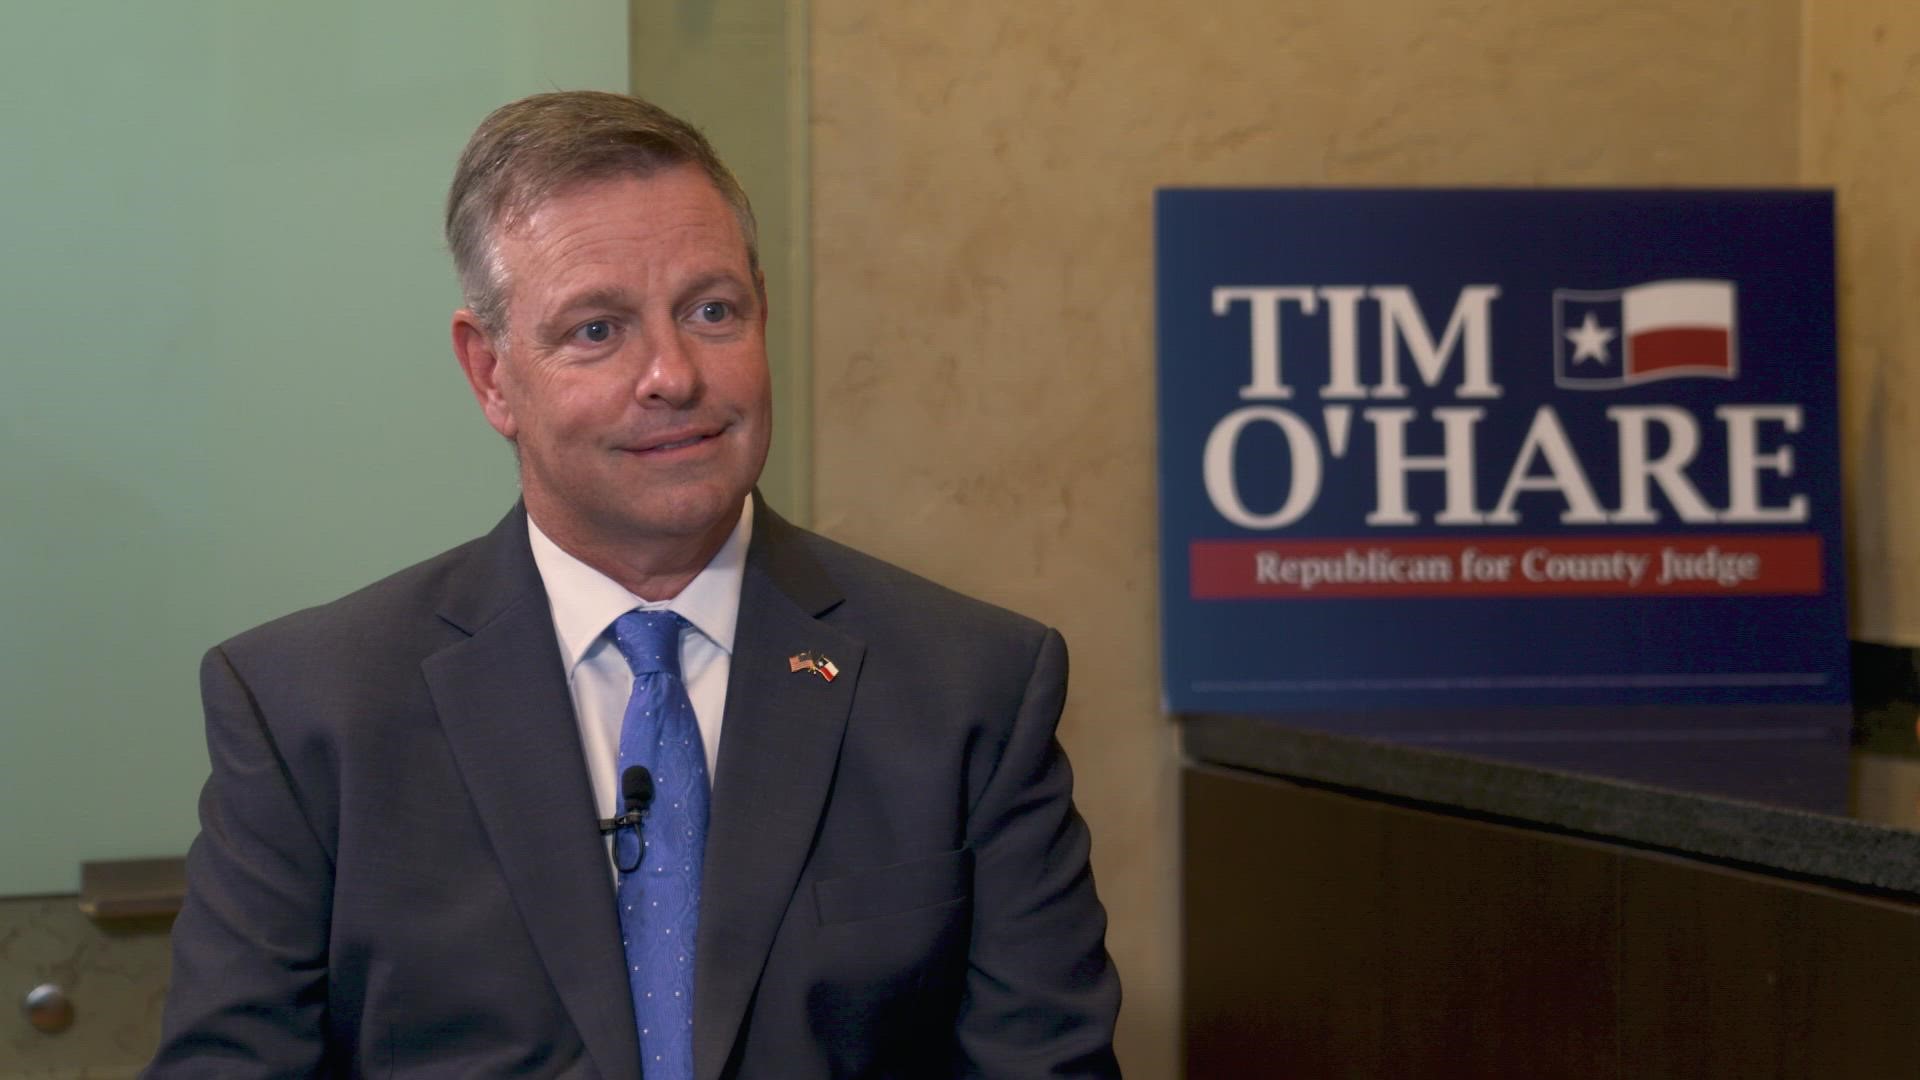 Tim O'Hare, Republican candidate for Tarrant County Judge.